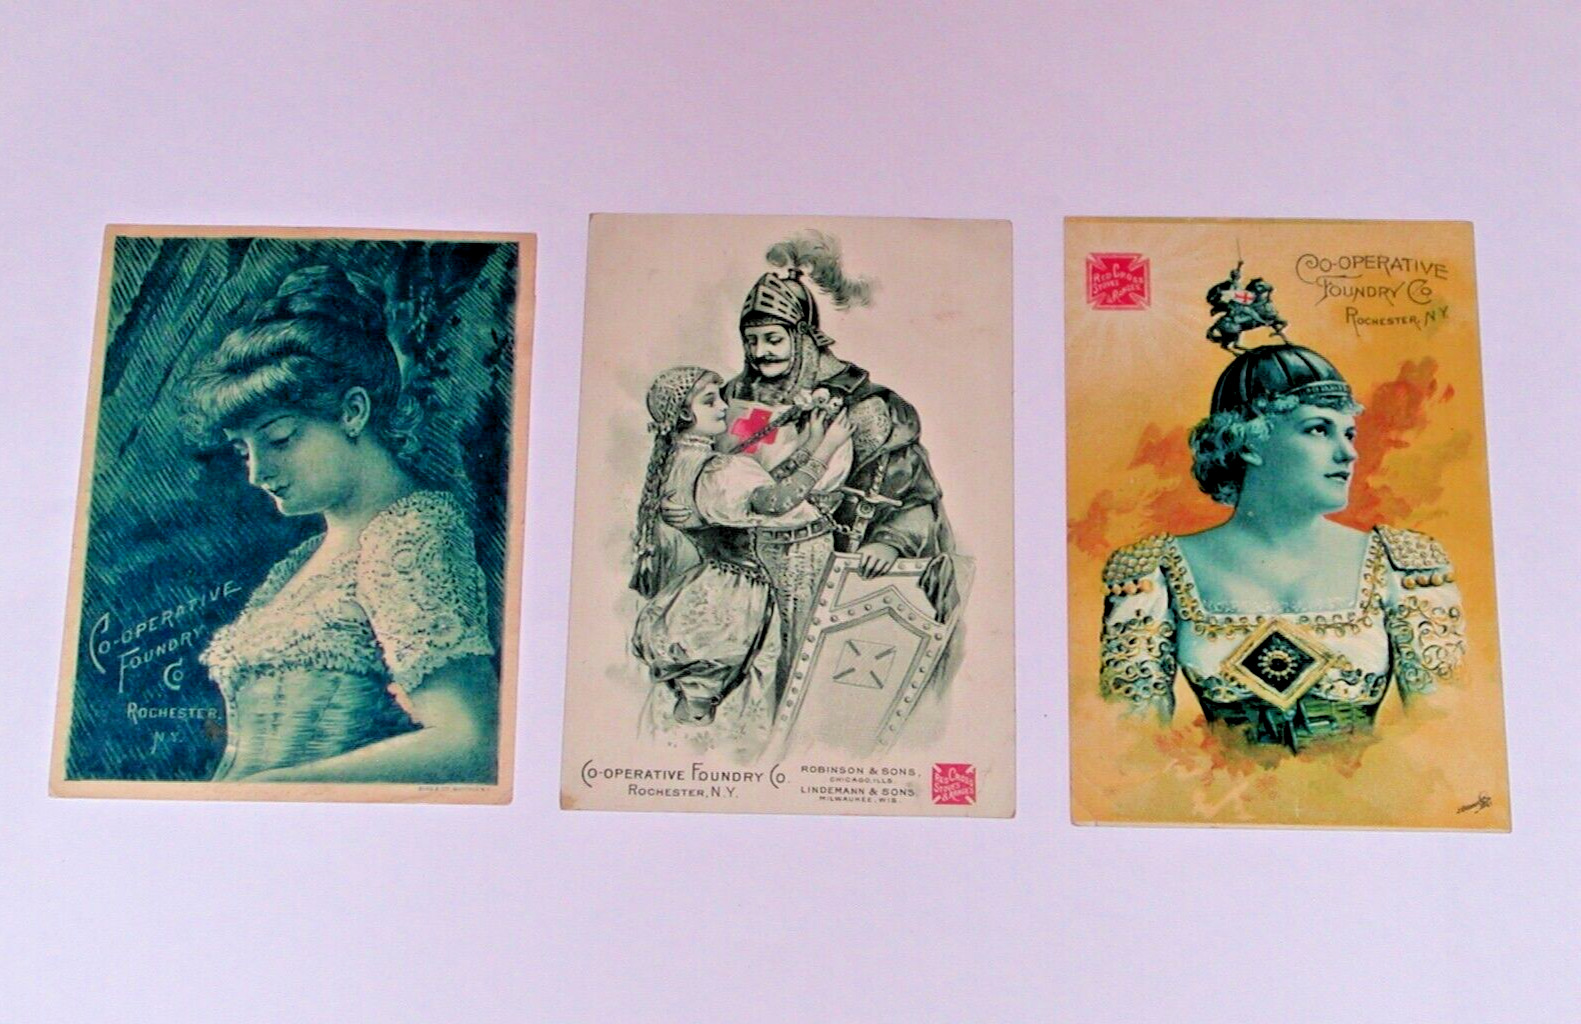 3 Early Co-Operative Foundry Rochester Red Cross Range & Base Burner Trade Cards